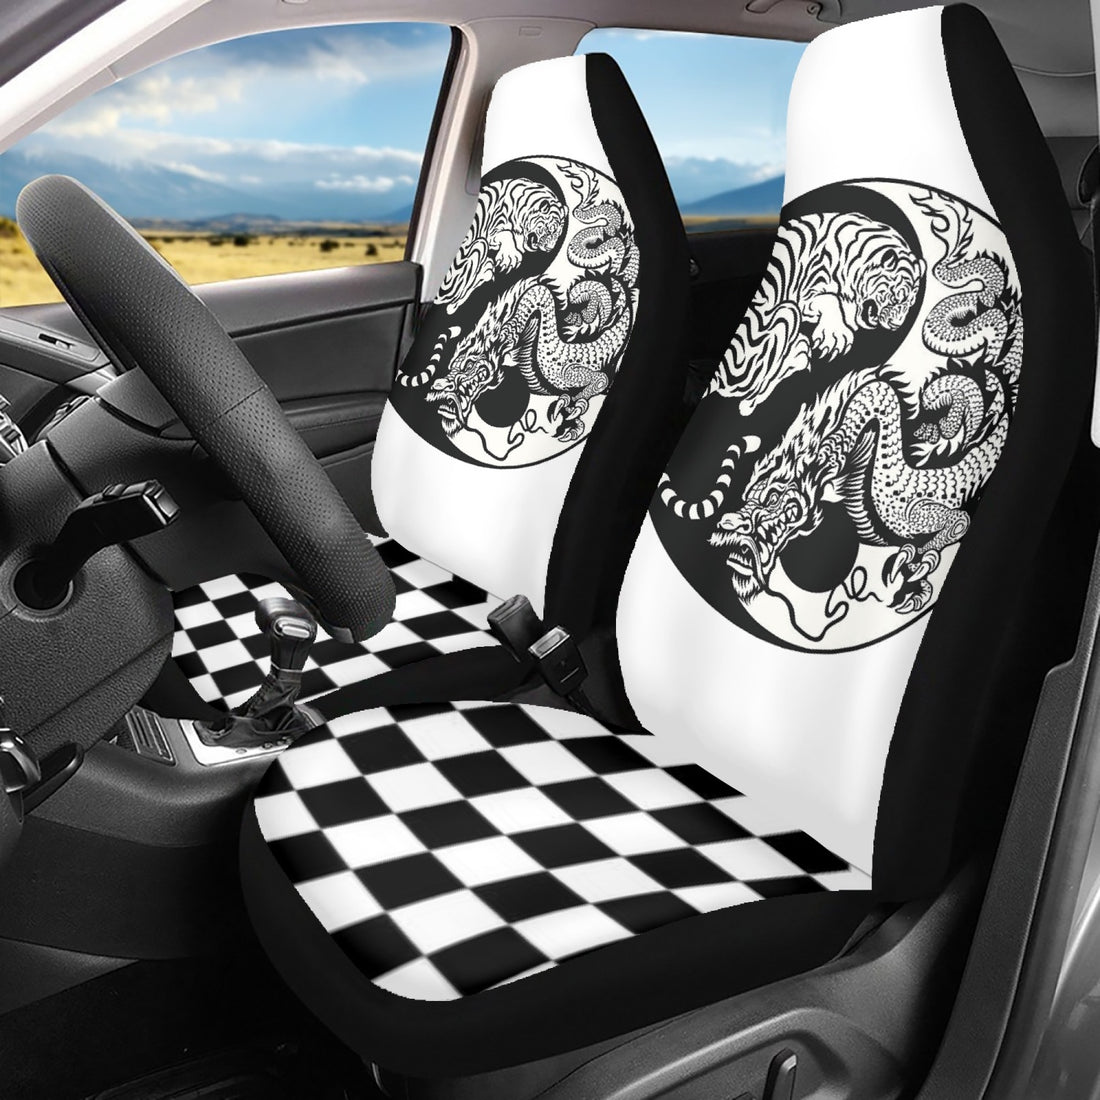 Microfiber Car Seat Covers - 3Pcs Tiger and Dragon Home-clothes-jewelry